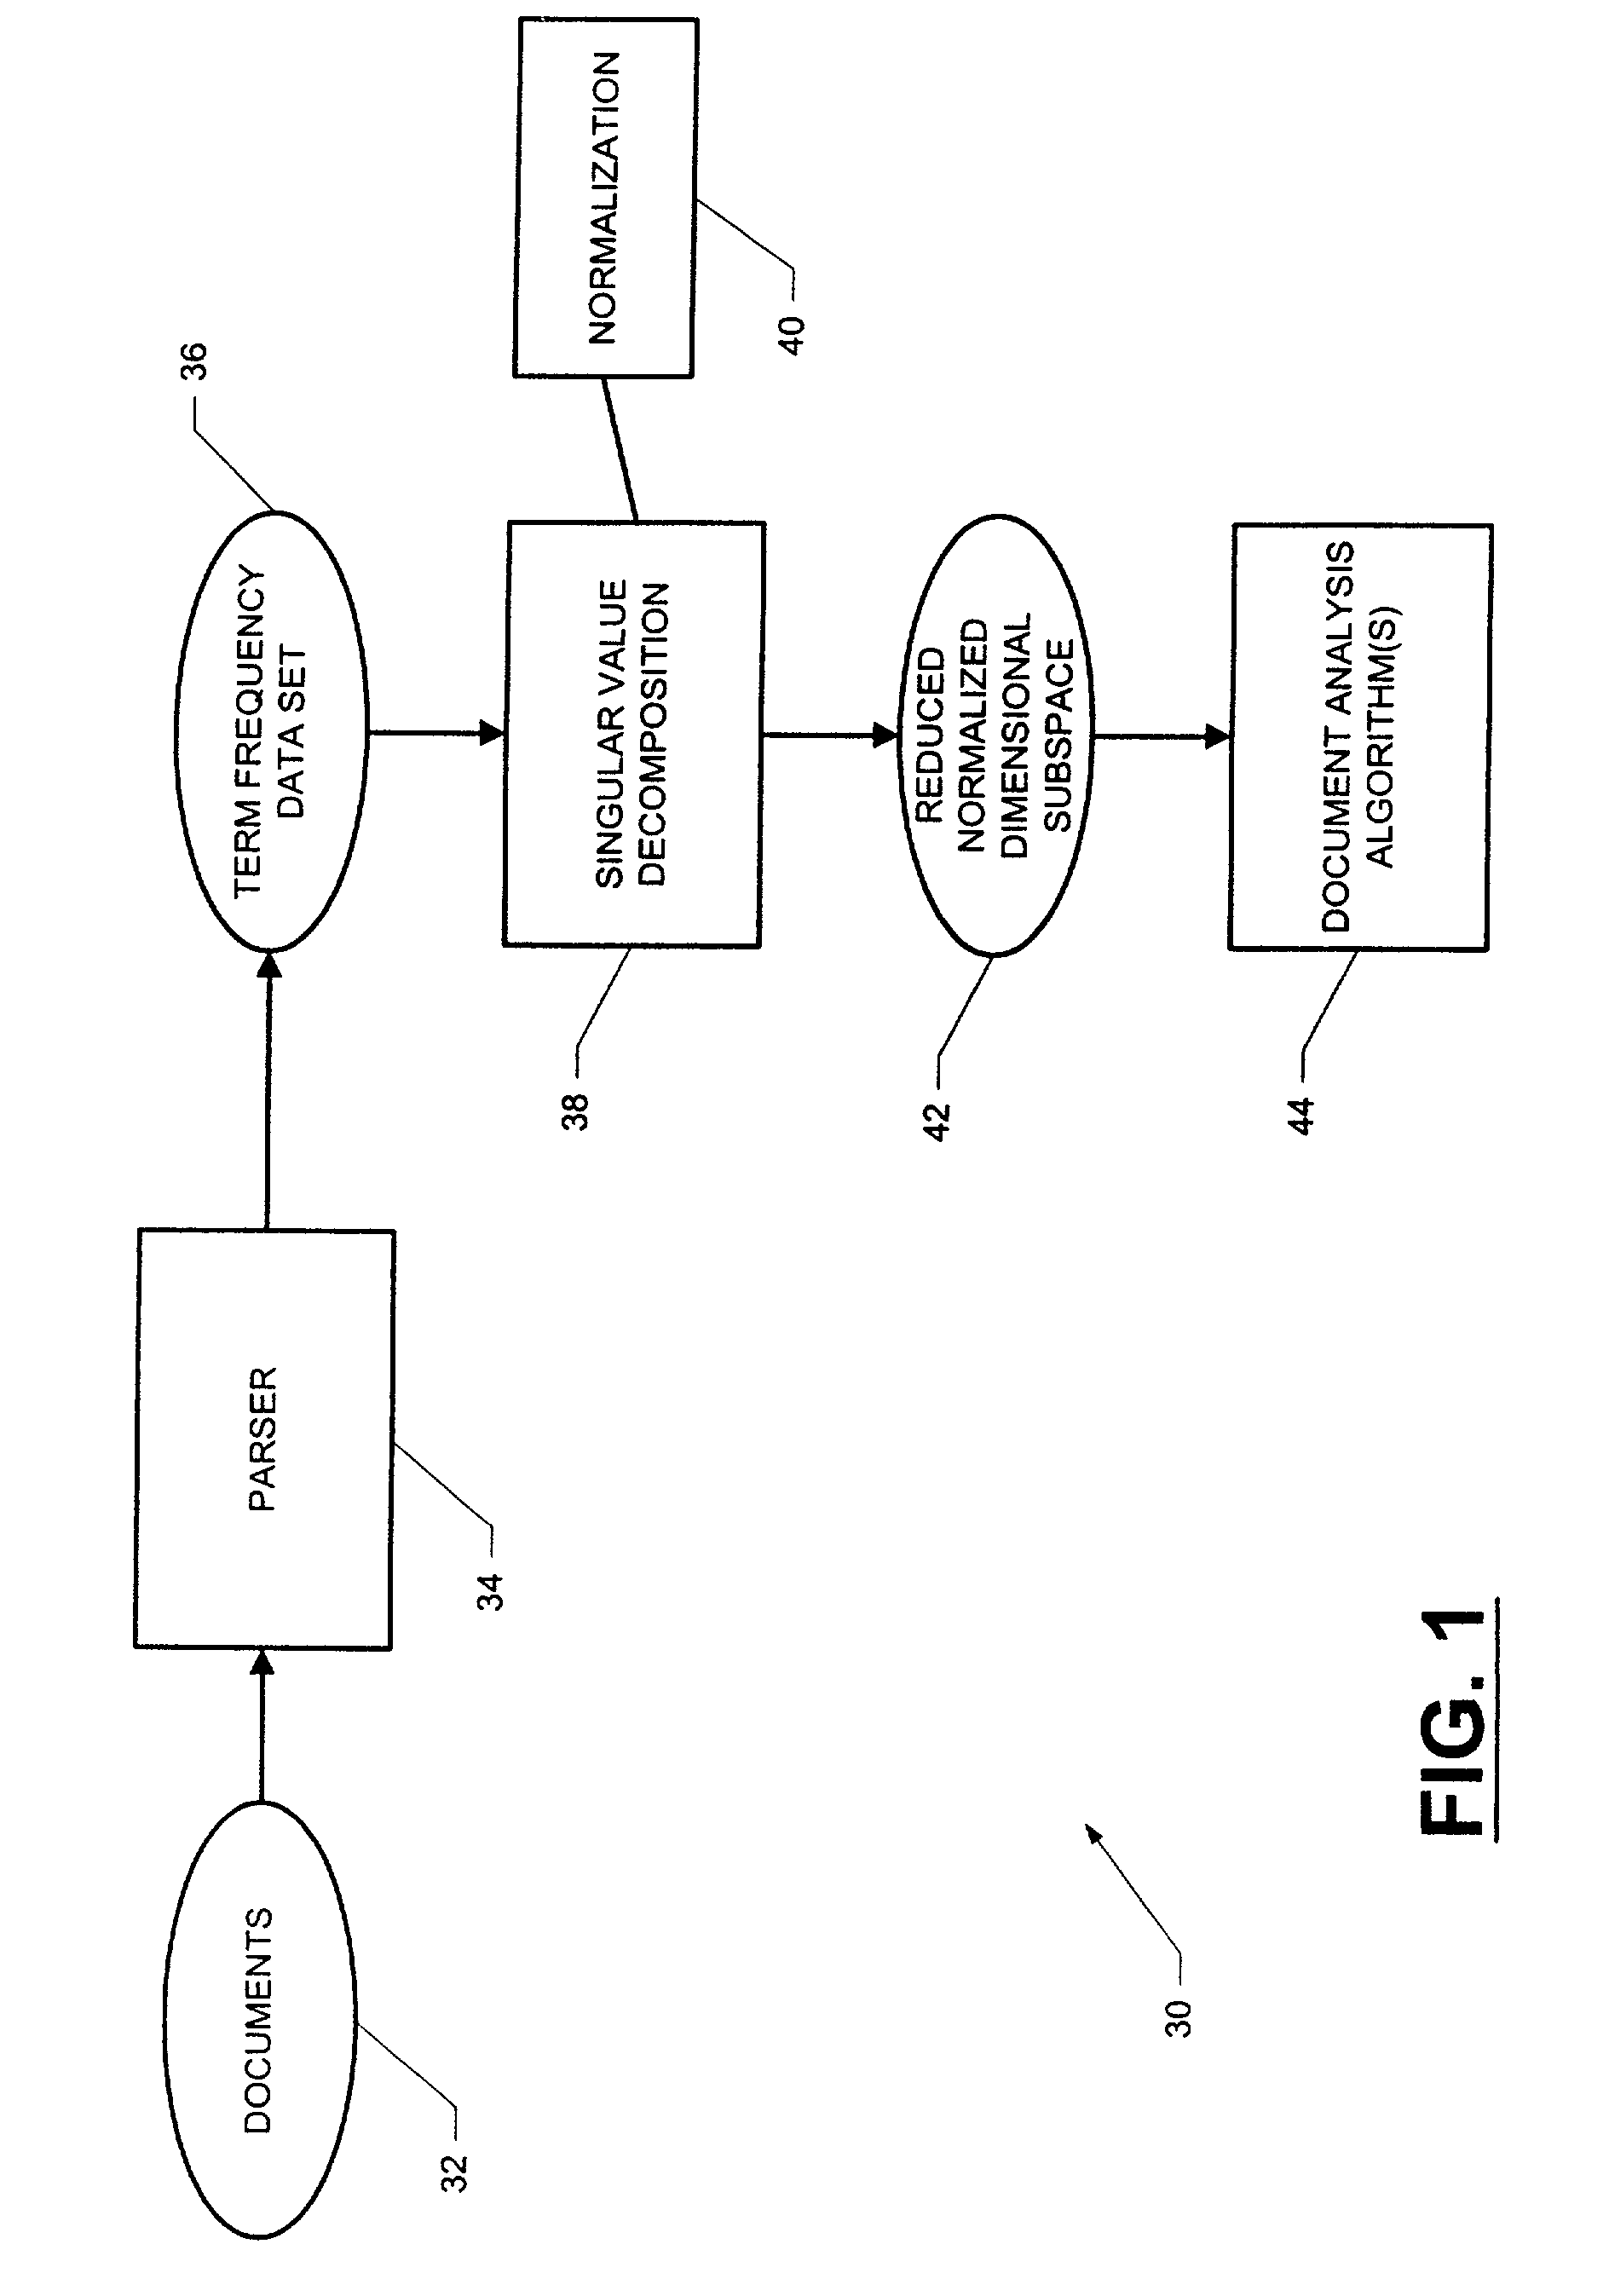 Computer-implemented system and method for text-based document processing